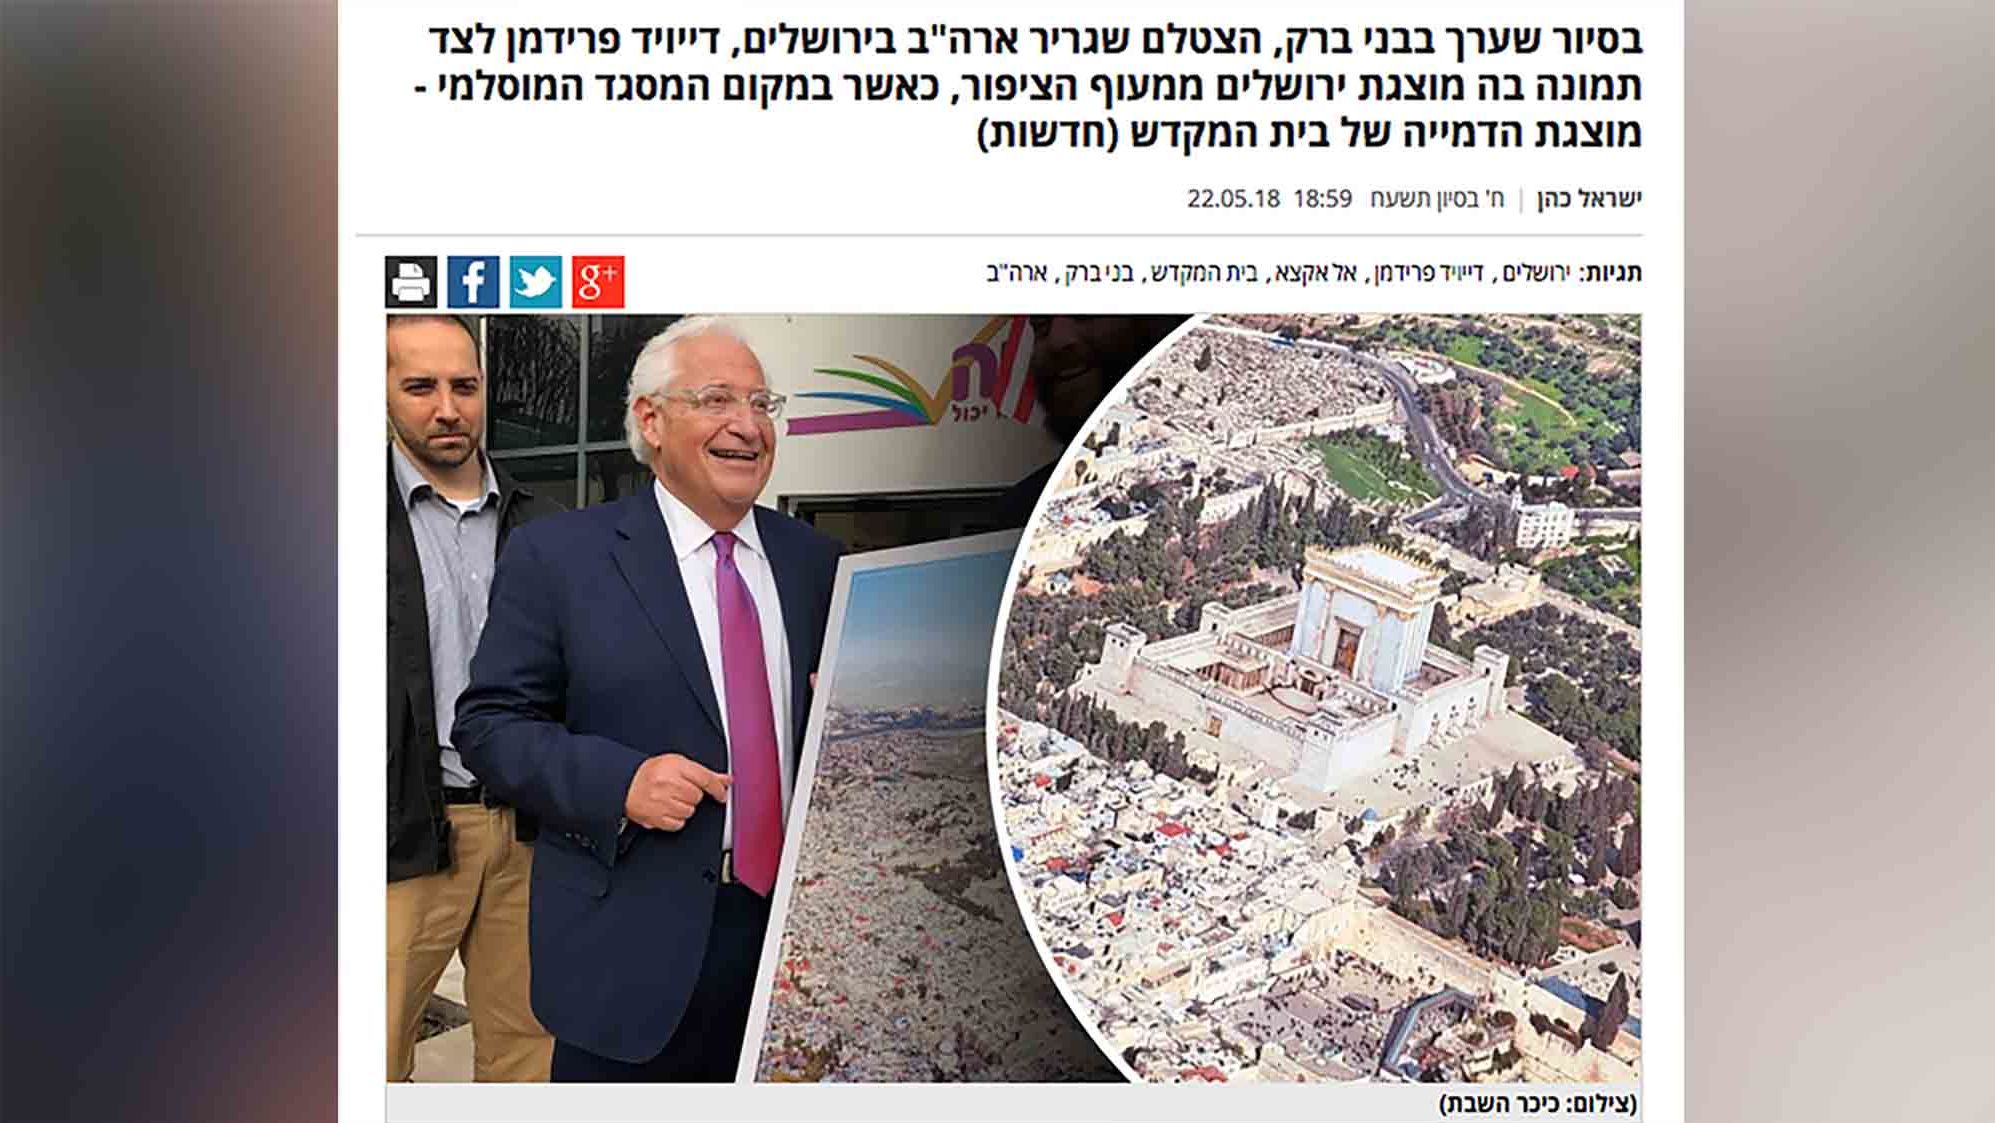 David Friedman is seen with a controversial photo illustration depicting an artist's impression of a Jewish temple in Jerusalem in place of one of Islam's holiest sites, as seen on the Israeli news website Kikar Hashabat.